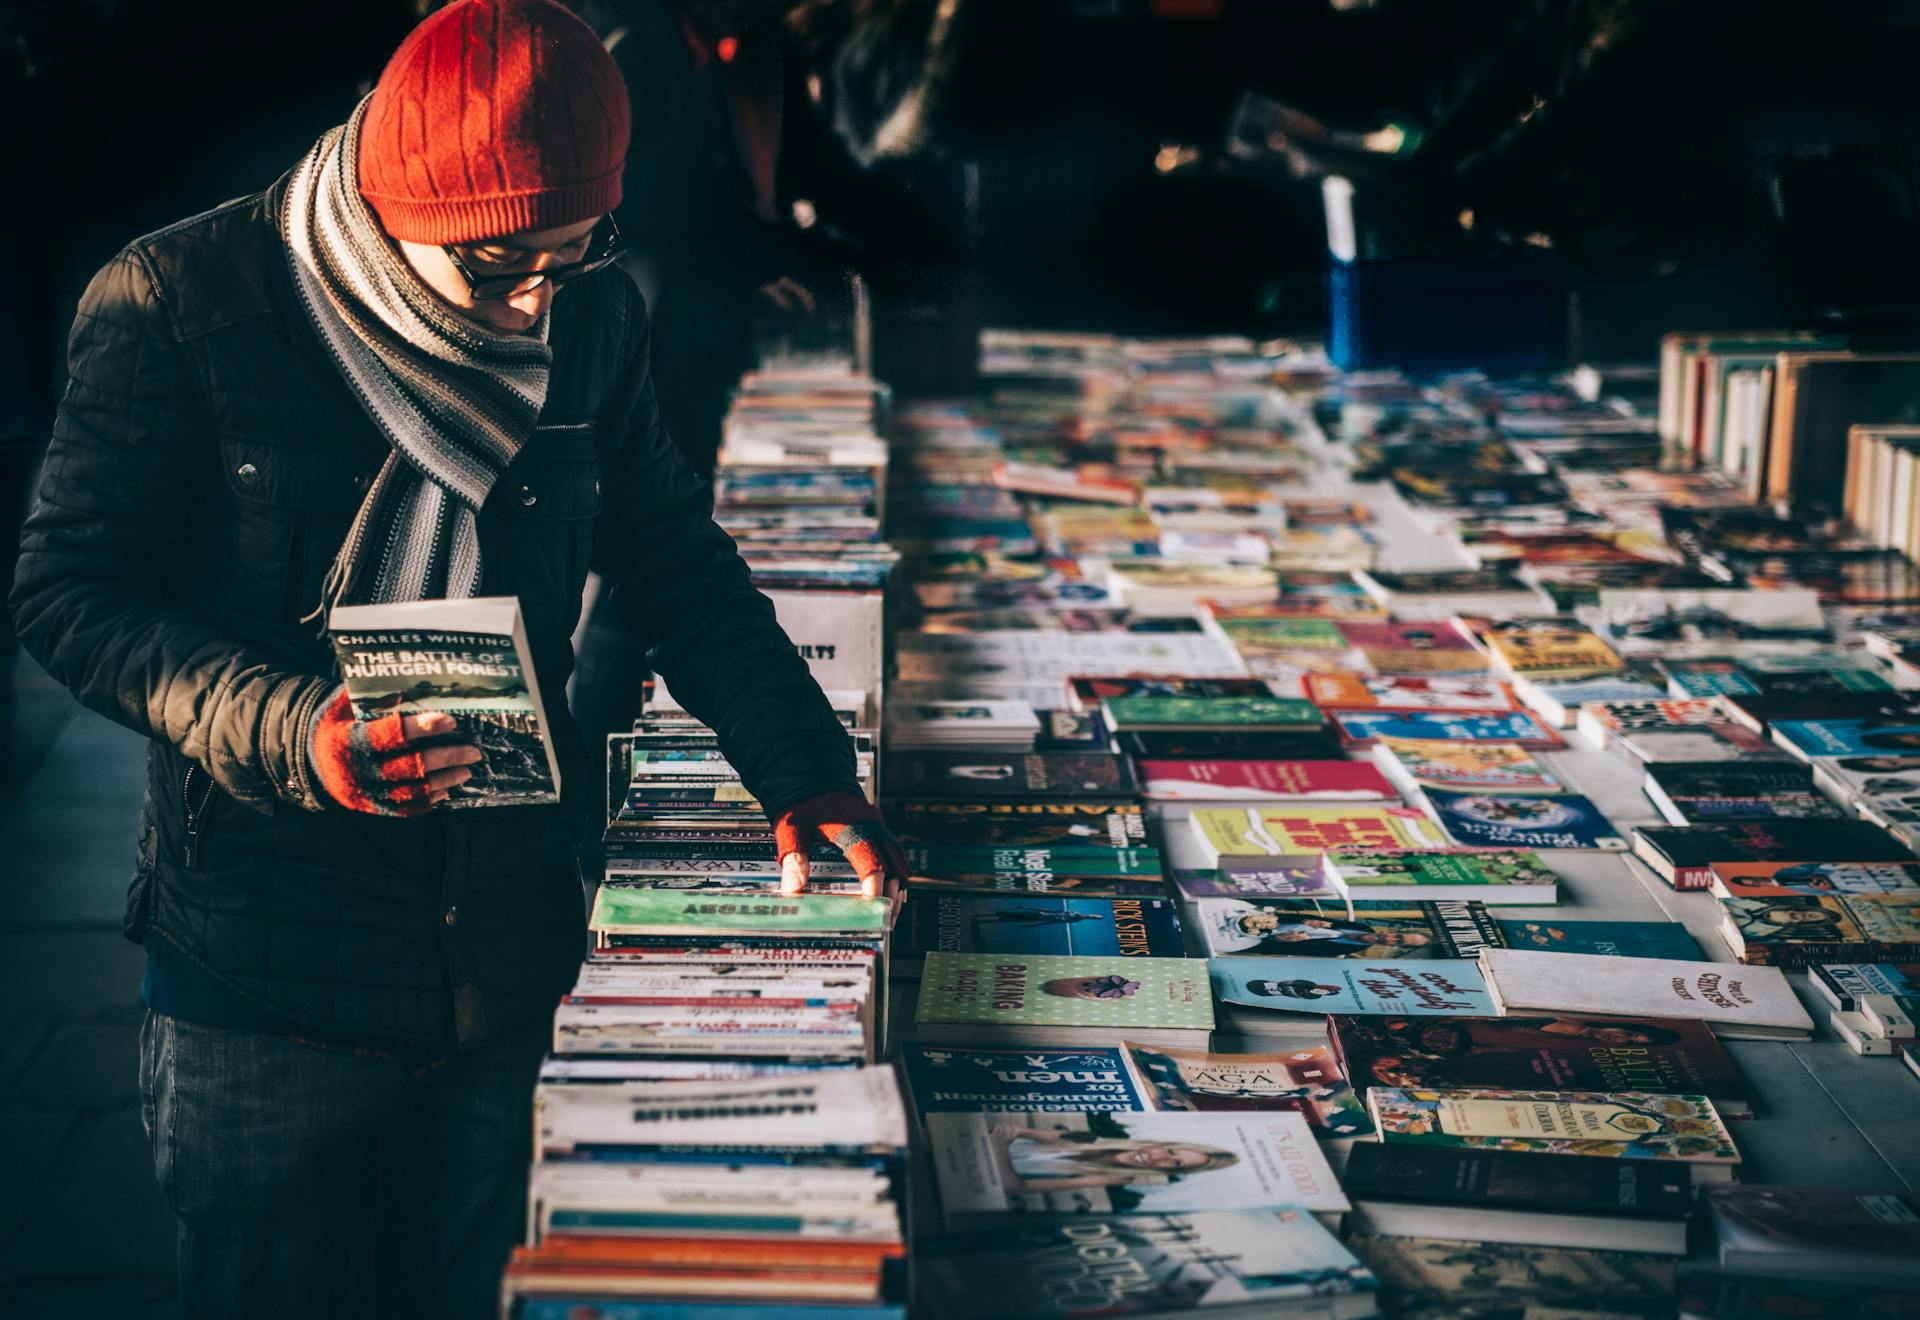 Man looking at books on a sale table